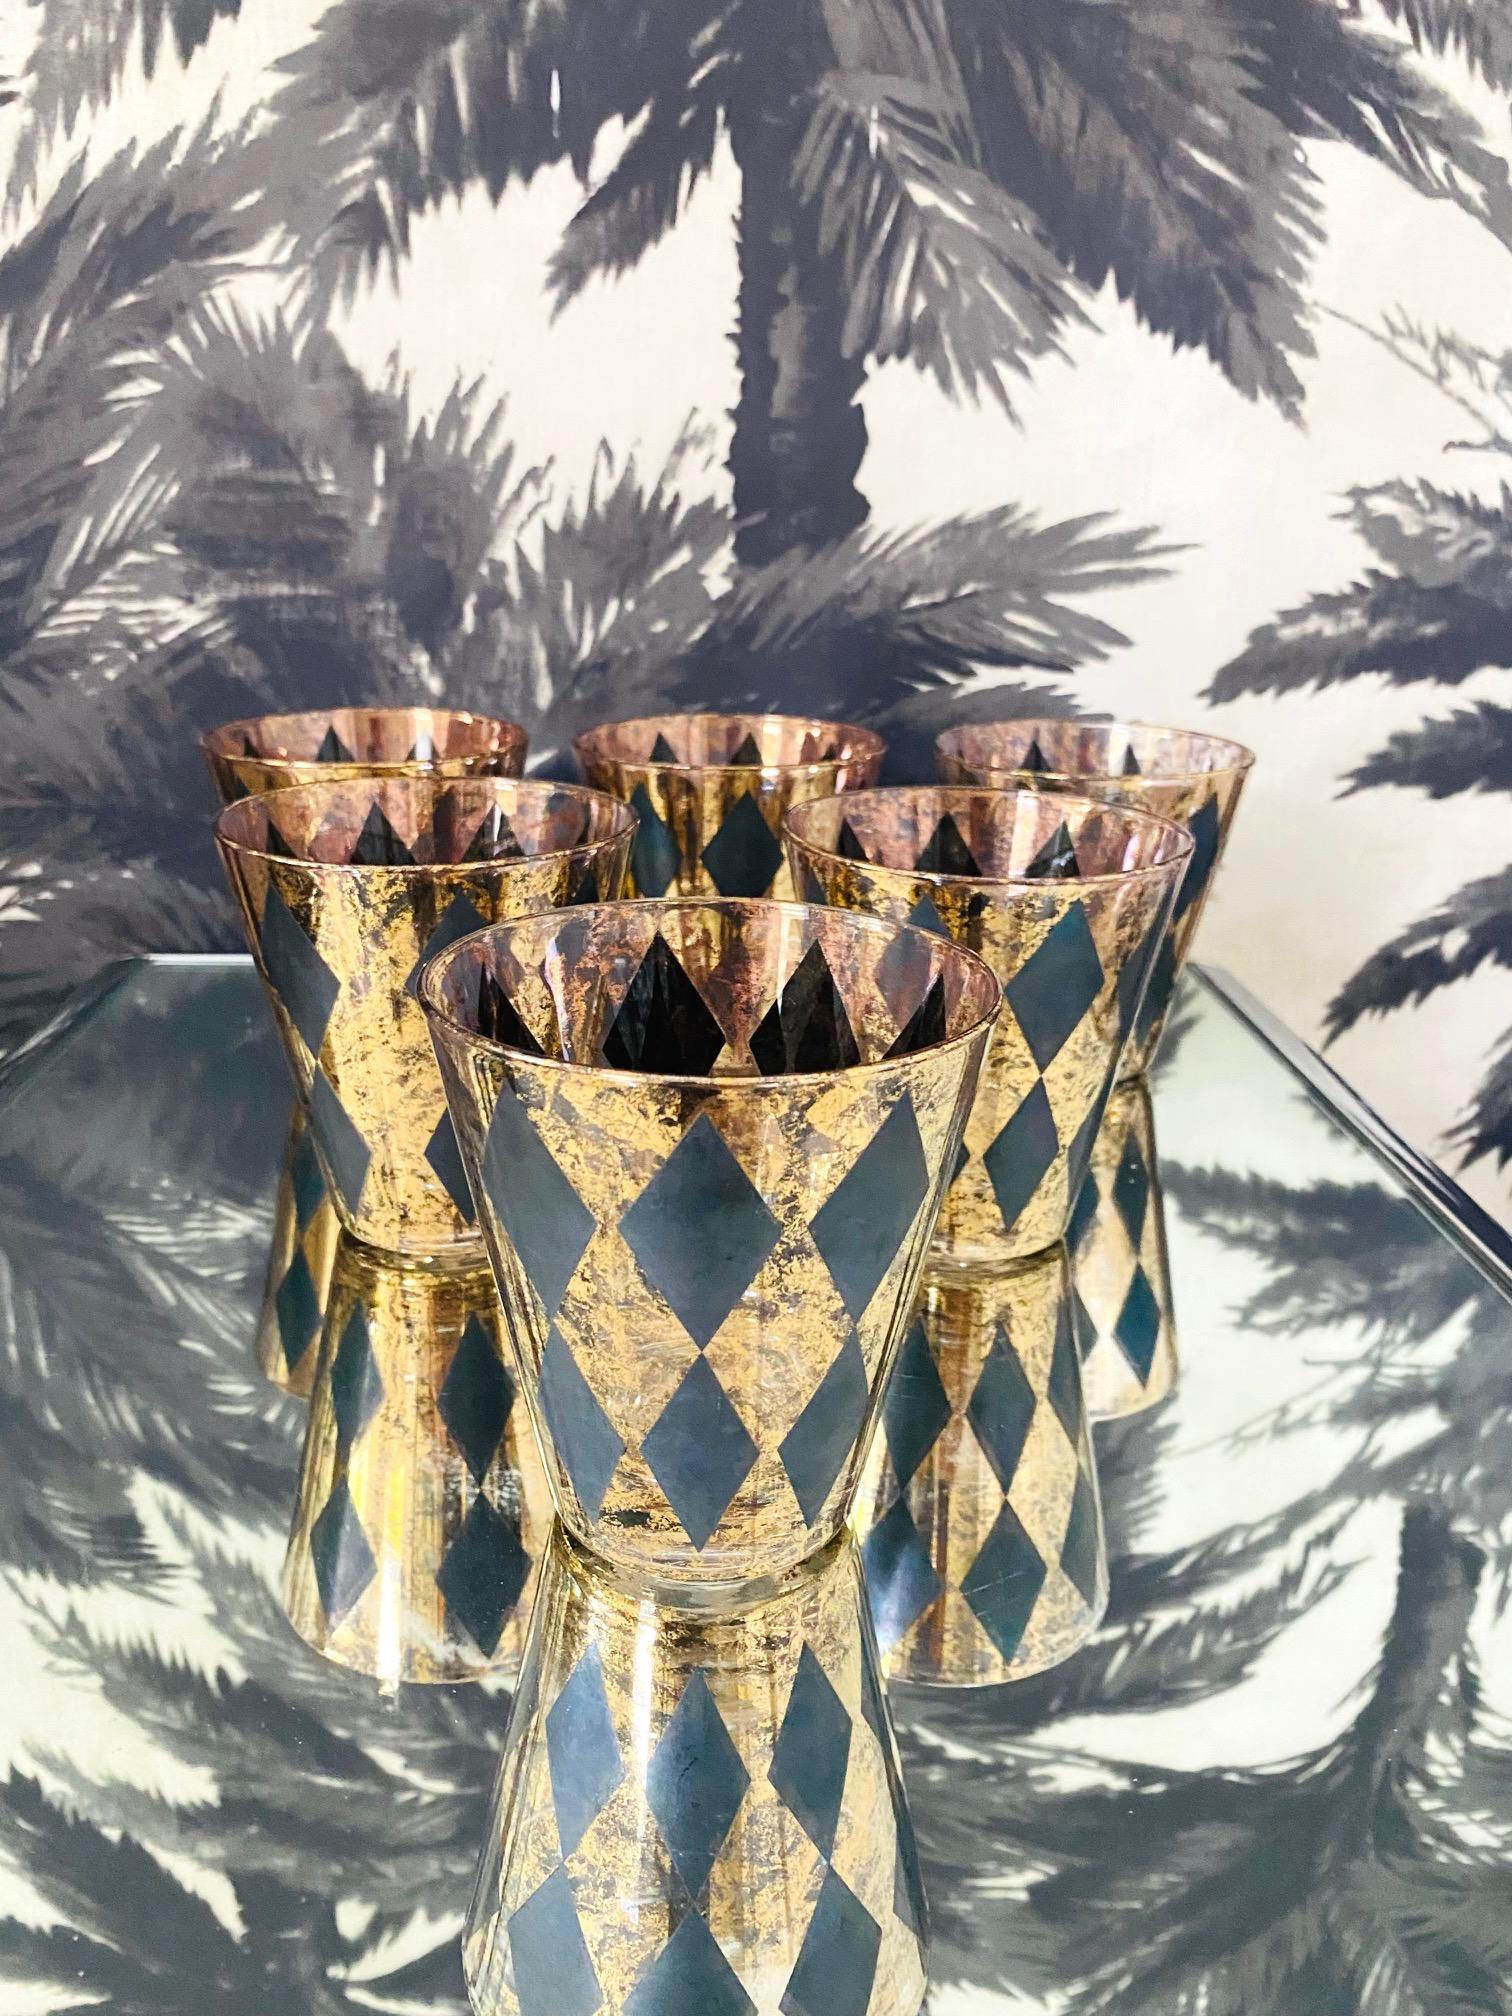 1960's Hollywood Regency whiskey rock glasses with Harlequin design. Cocktail set includes six handblown glasses with tapered forms featuring black diamond patterns over clear glass with 22-karat gold leaf flecks throughout.  Makes a chic addition